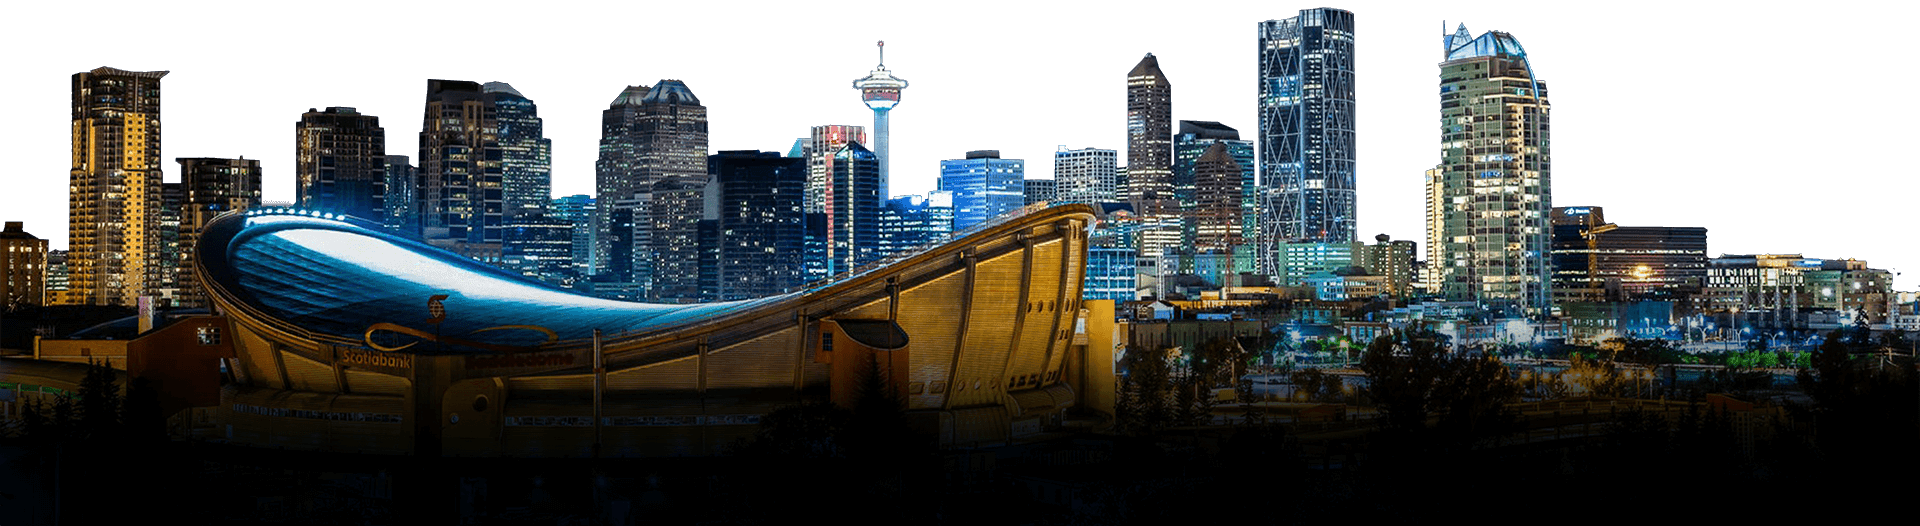 Calgary City Skyline PNG Image - PurePNG | Free transparent CC0 PNG Image Library